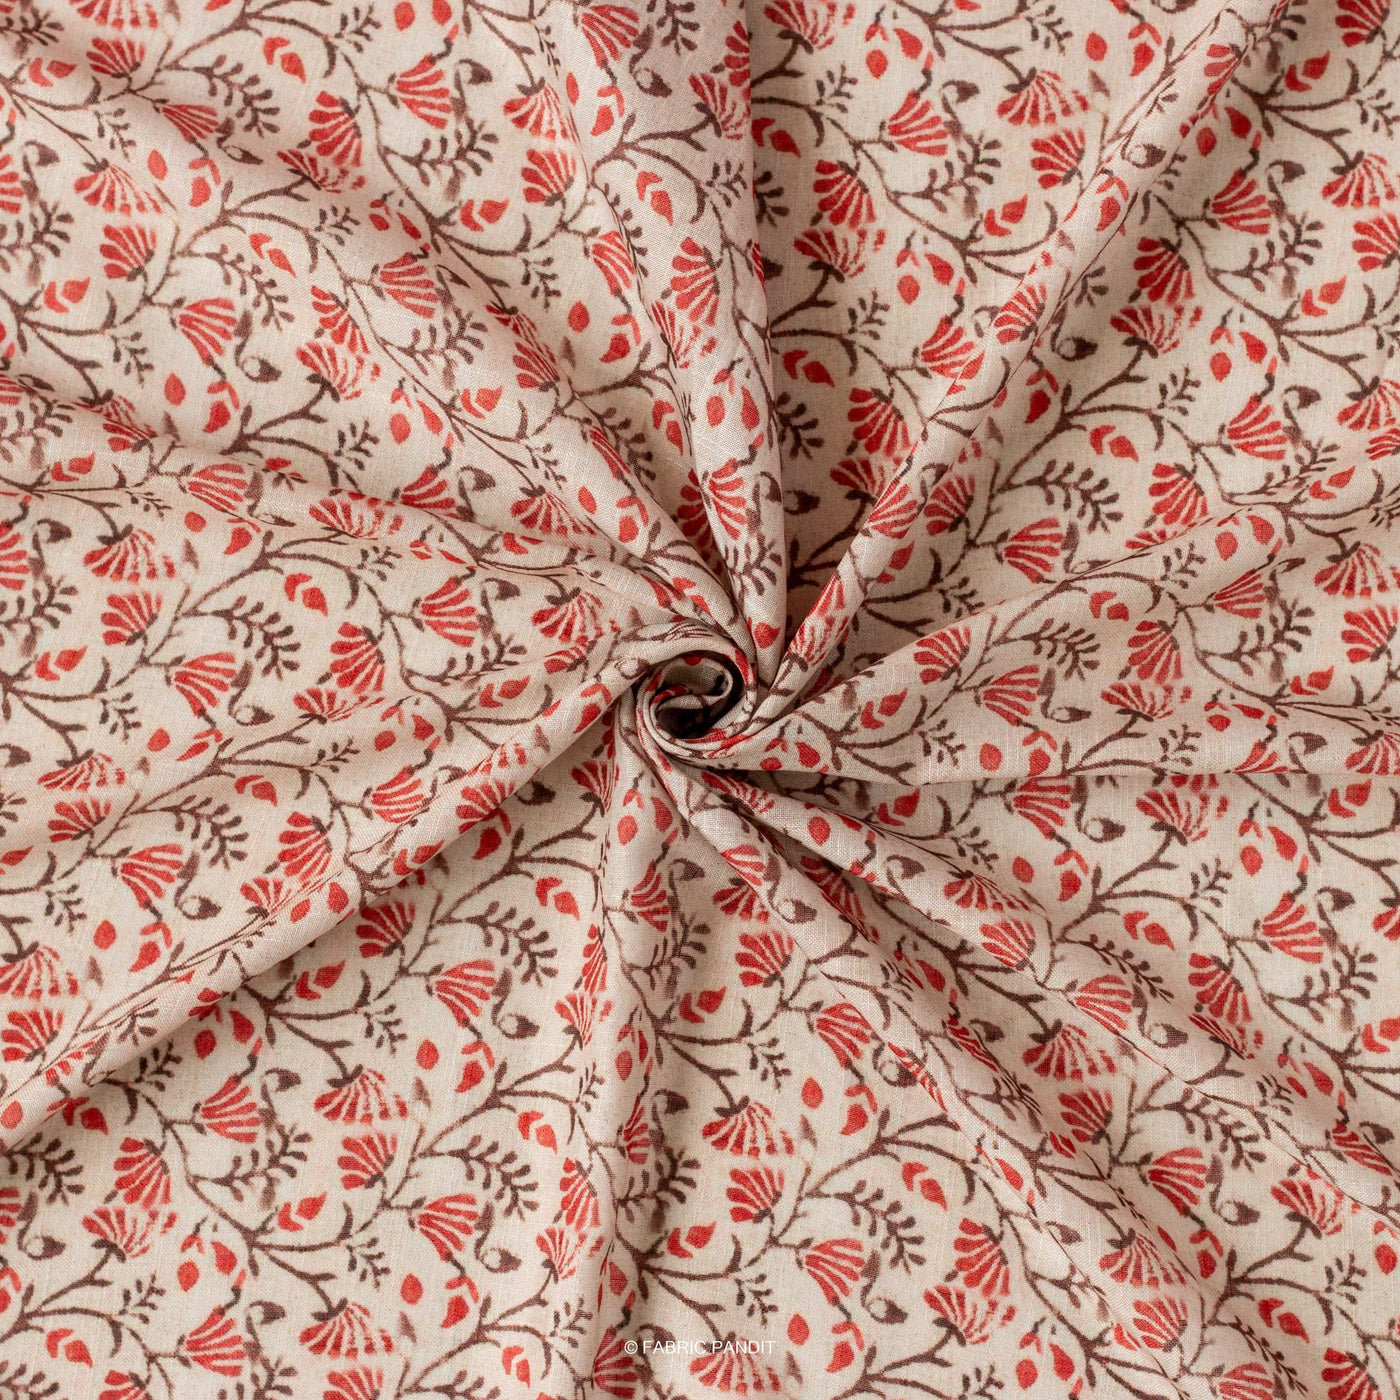 Fabric Pandit Cut Piece 0.25M (CUT PIECE) Red And Khaki Continuous Floral Pattern Digital Printed Linen Slub Fabric (Width 44 Inches)